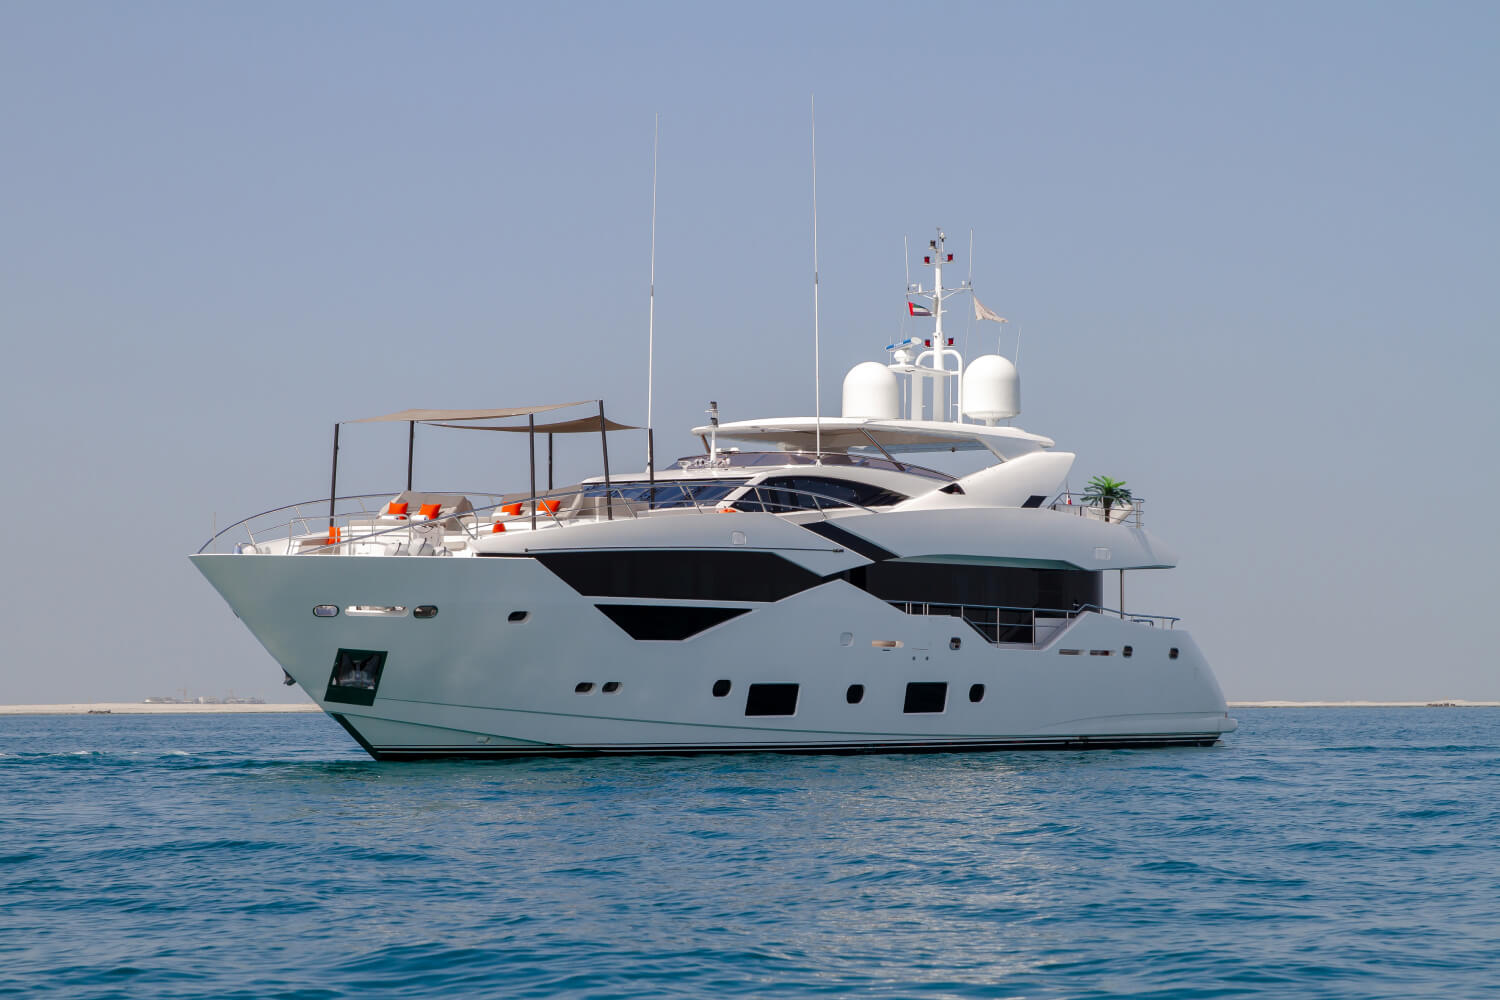 Sunseeker YachSunseeker Yachts: 7 Compelling Reasons To Make Them Yoursts: 7 Compelling Reasons To Make Them Yours